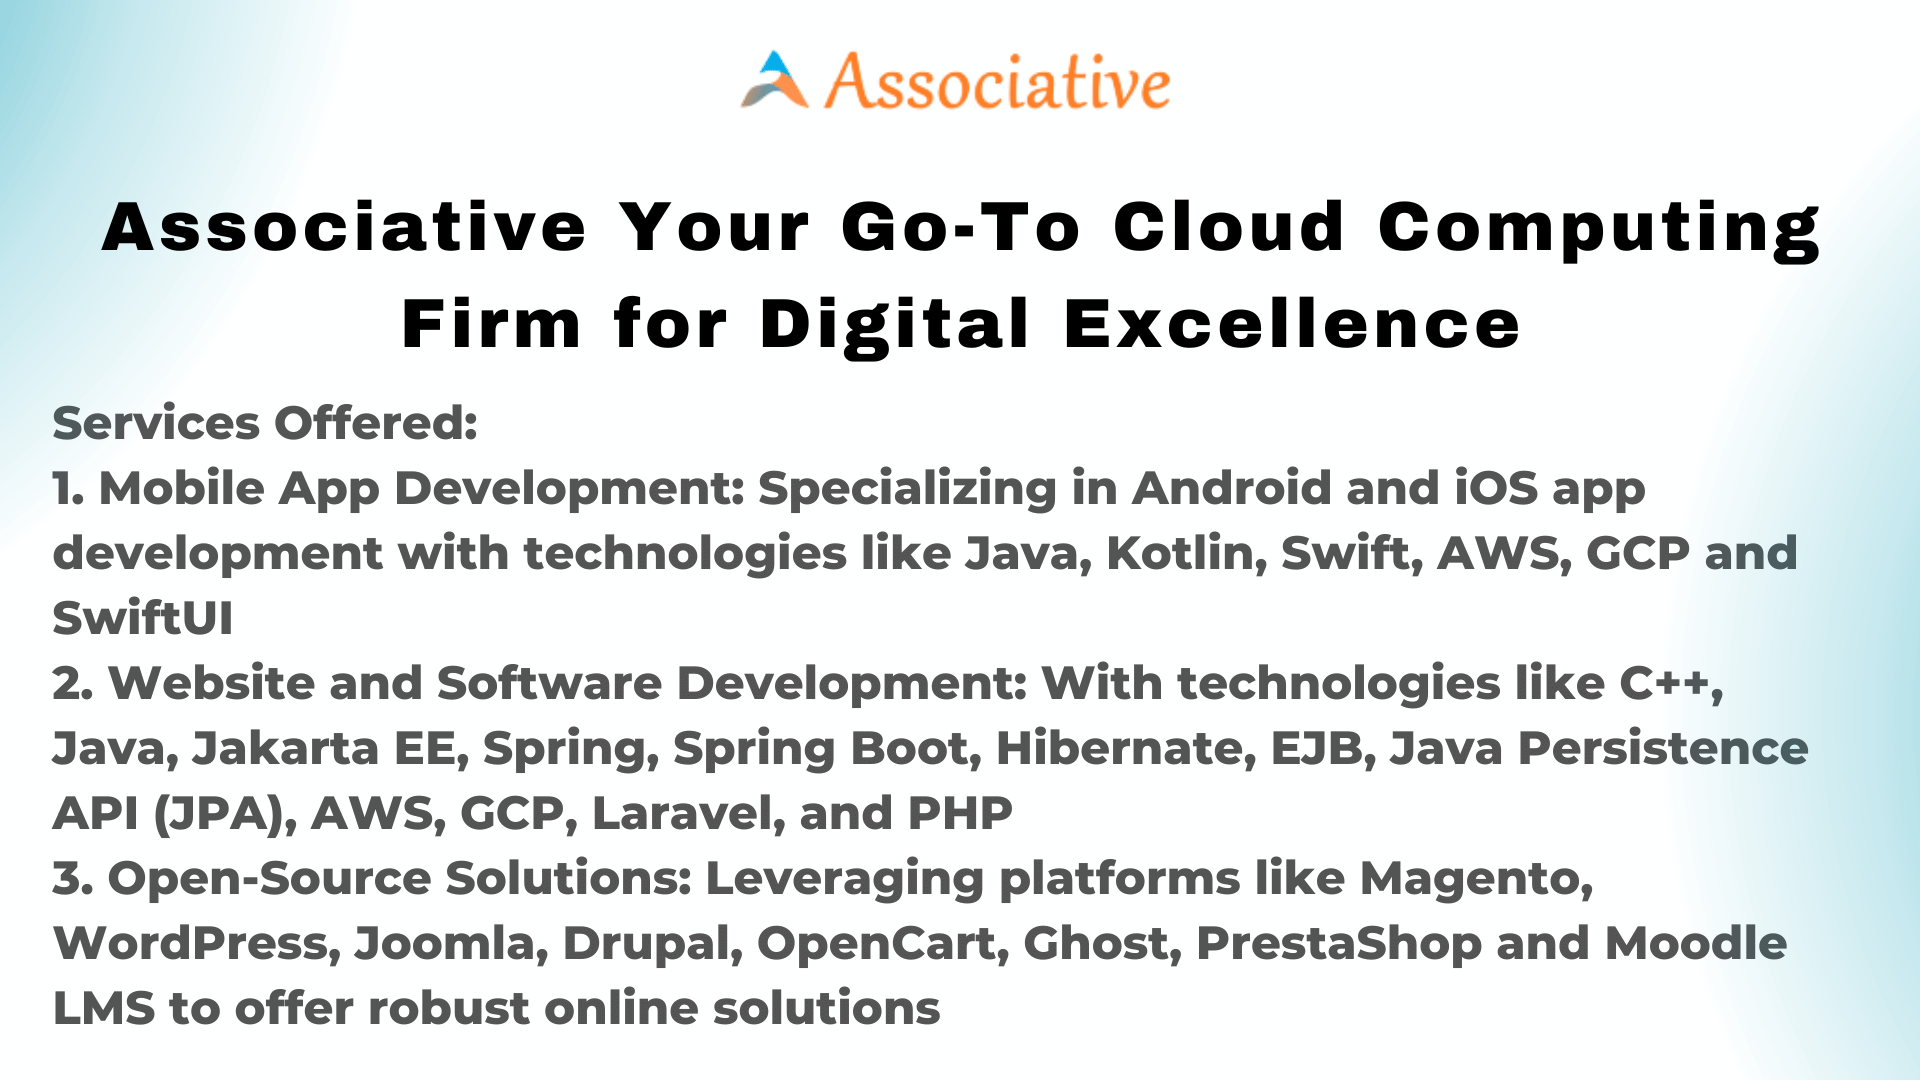 Associative Your Go-To Cloud Computing Firm for Digital Excellence